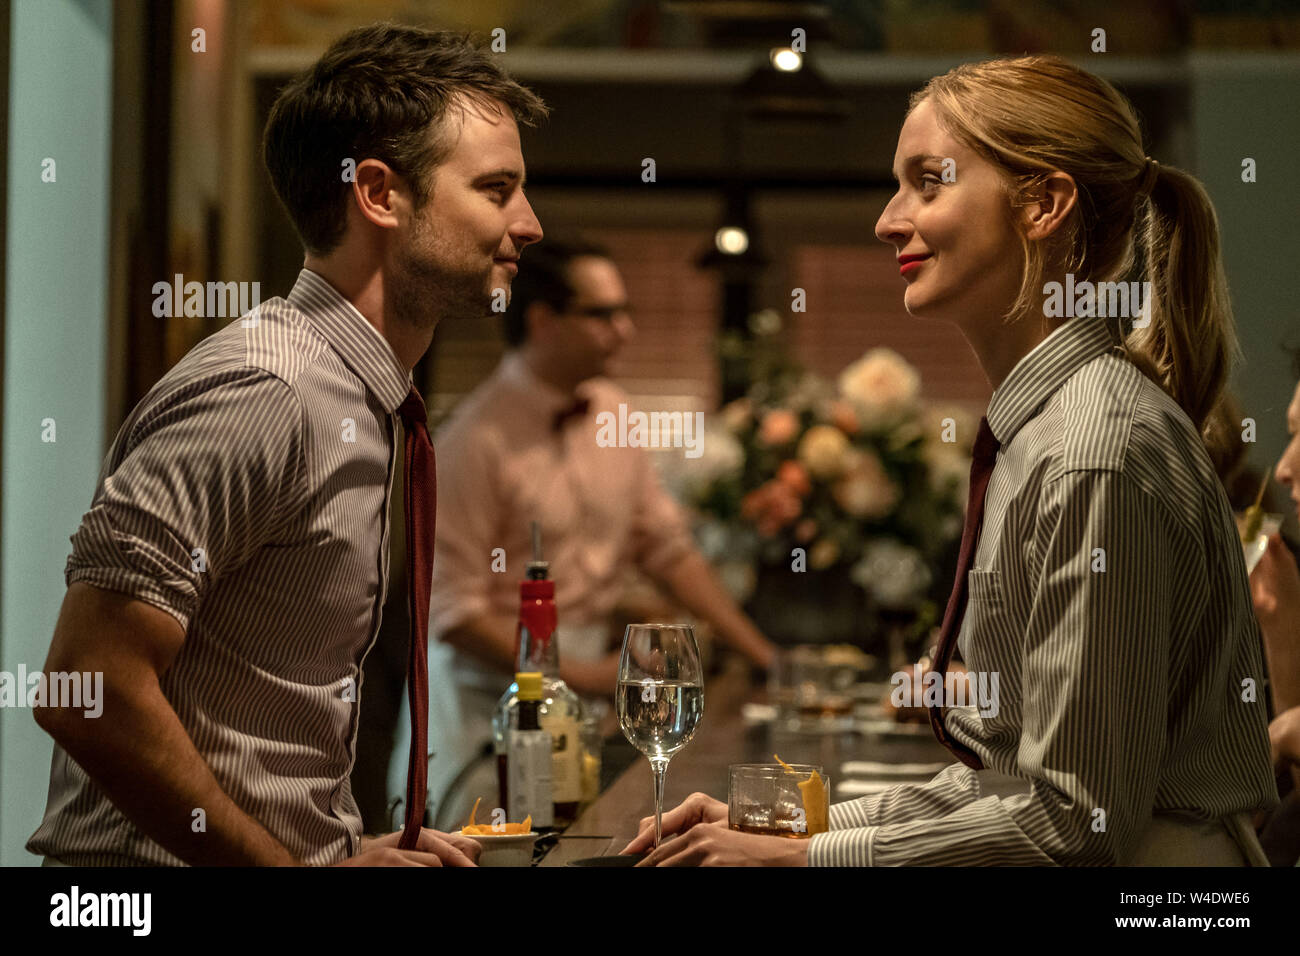 SWEETBITTER, Tom Sturridge, Caitlin Fitzgerald in 'Equifax and Experian',  (Season 2, Episode 202, aired July 14, 2019), ph: Macall Pobay / © Starz /  Courtesy Everett Collection Stock Photo - Alamy